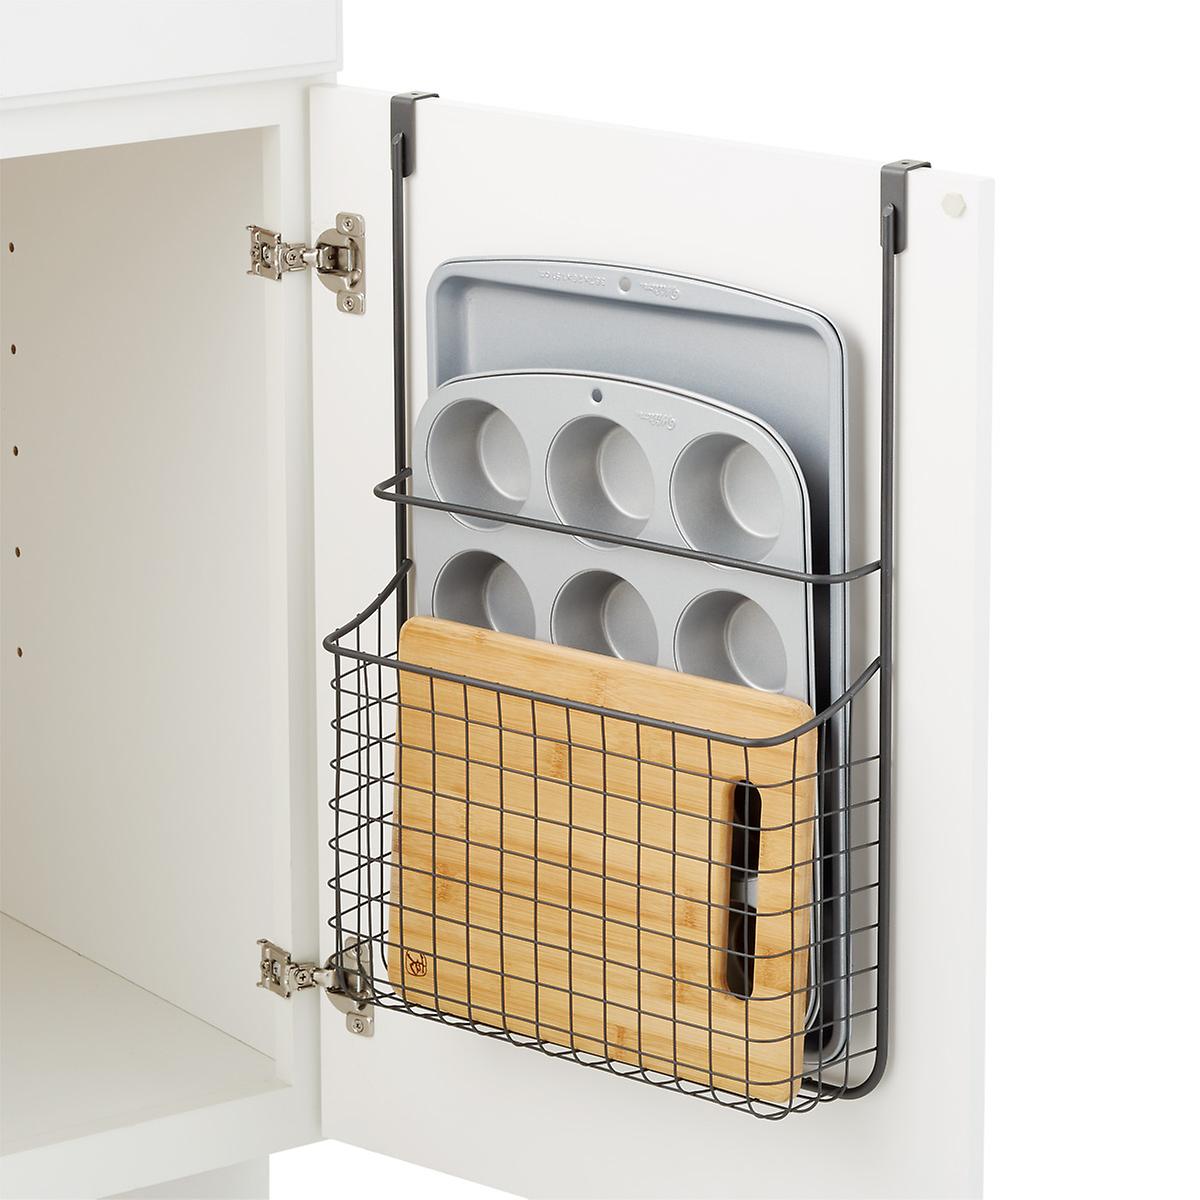 9 Kitchen Organizers Under $25 That Will Free Up Coveted Cabinet Space